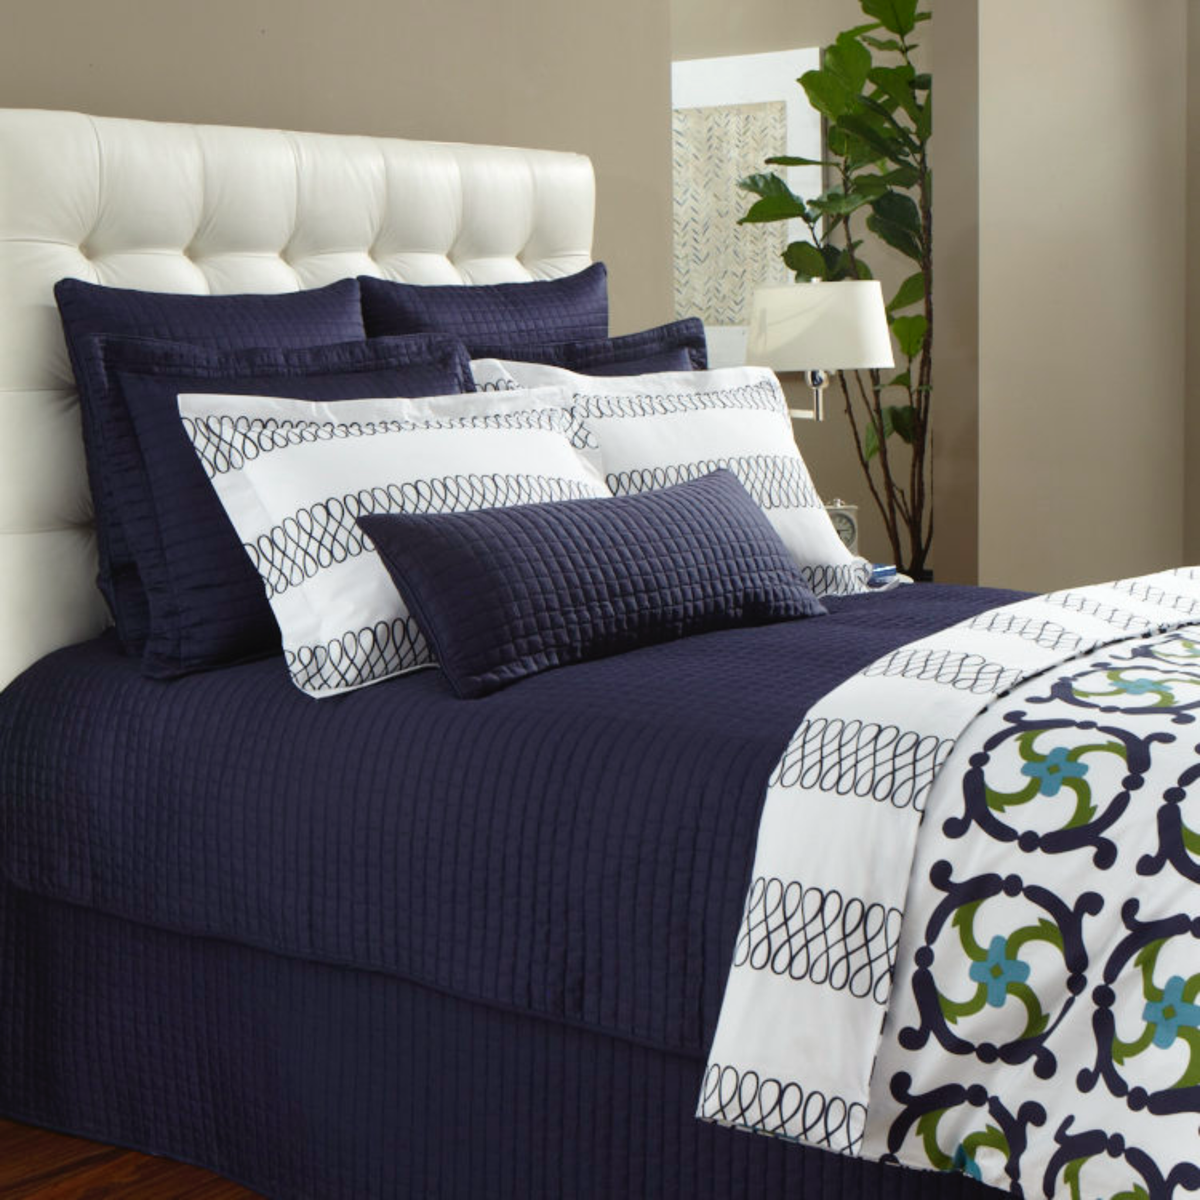 Full Bed in Downtown Company Urban Quilted Coverlets and Shams in Navy Color with Coordinate